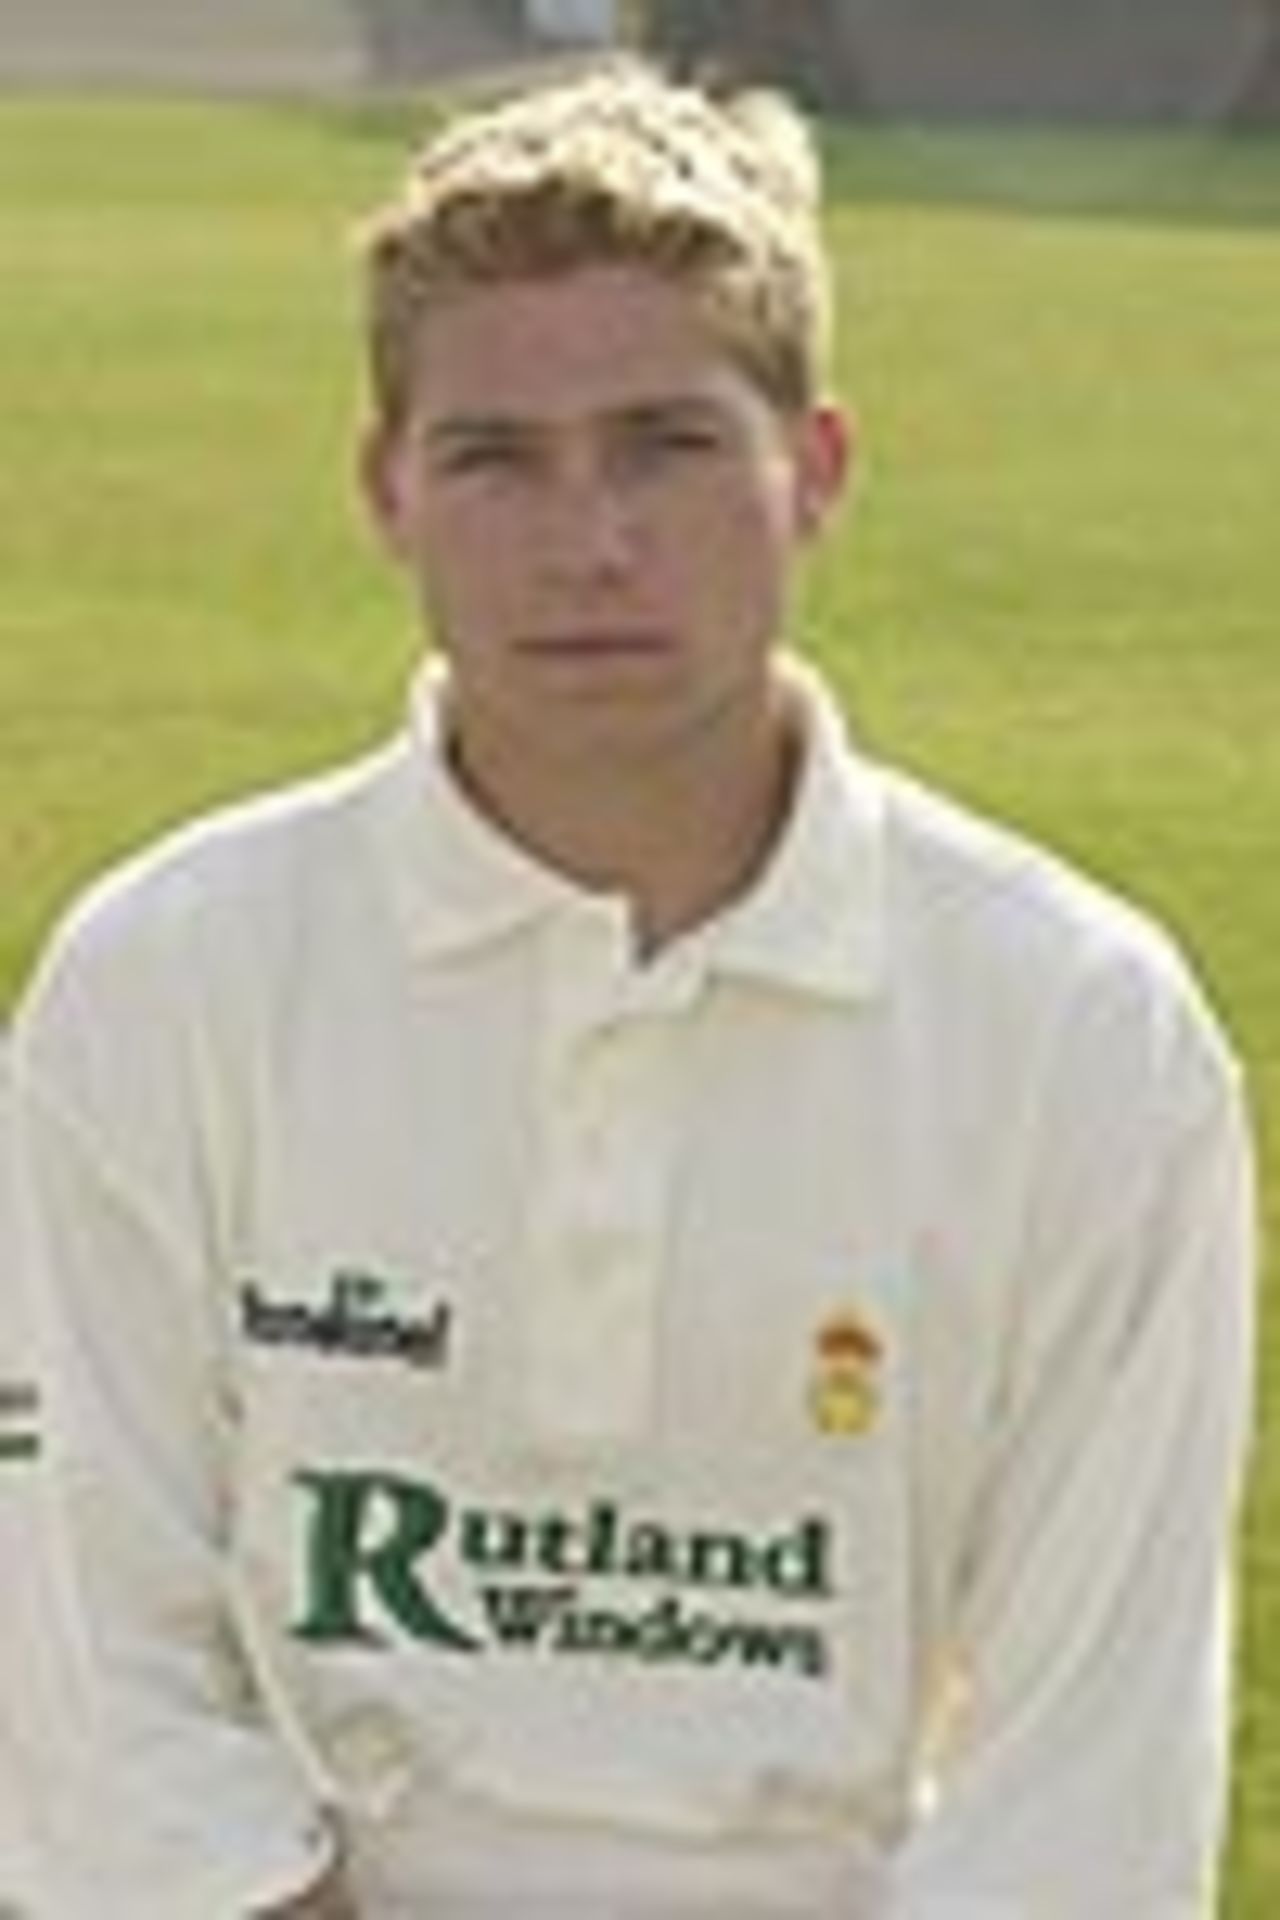 Taken at the 2002 Derbys CCC photocall